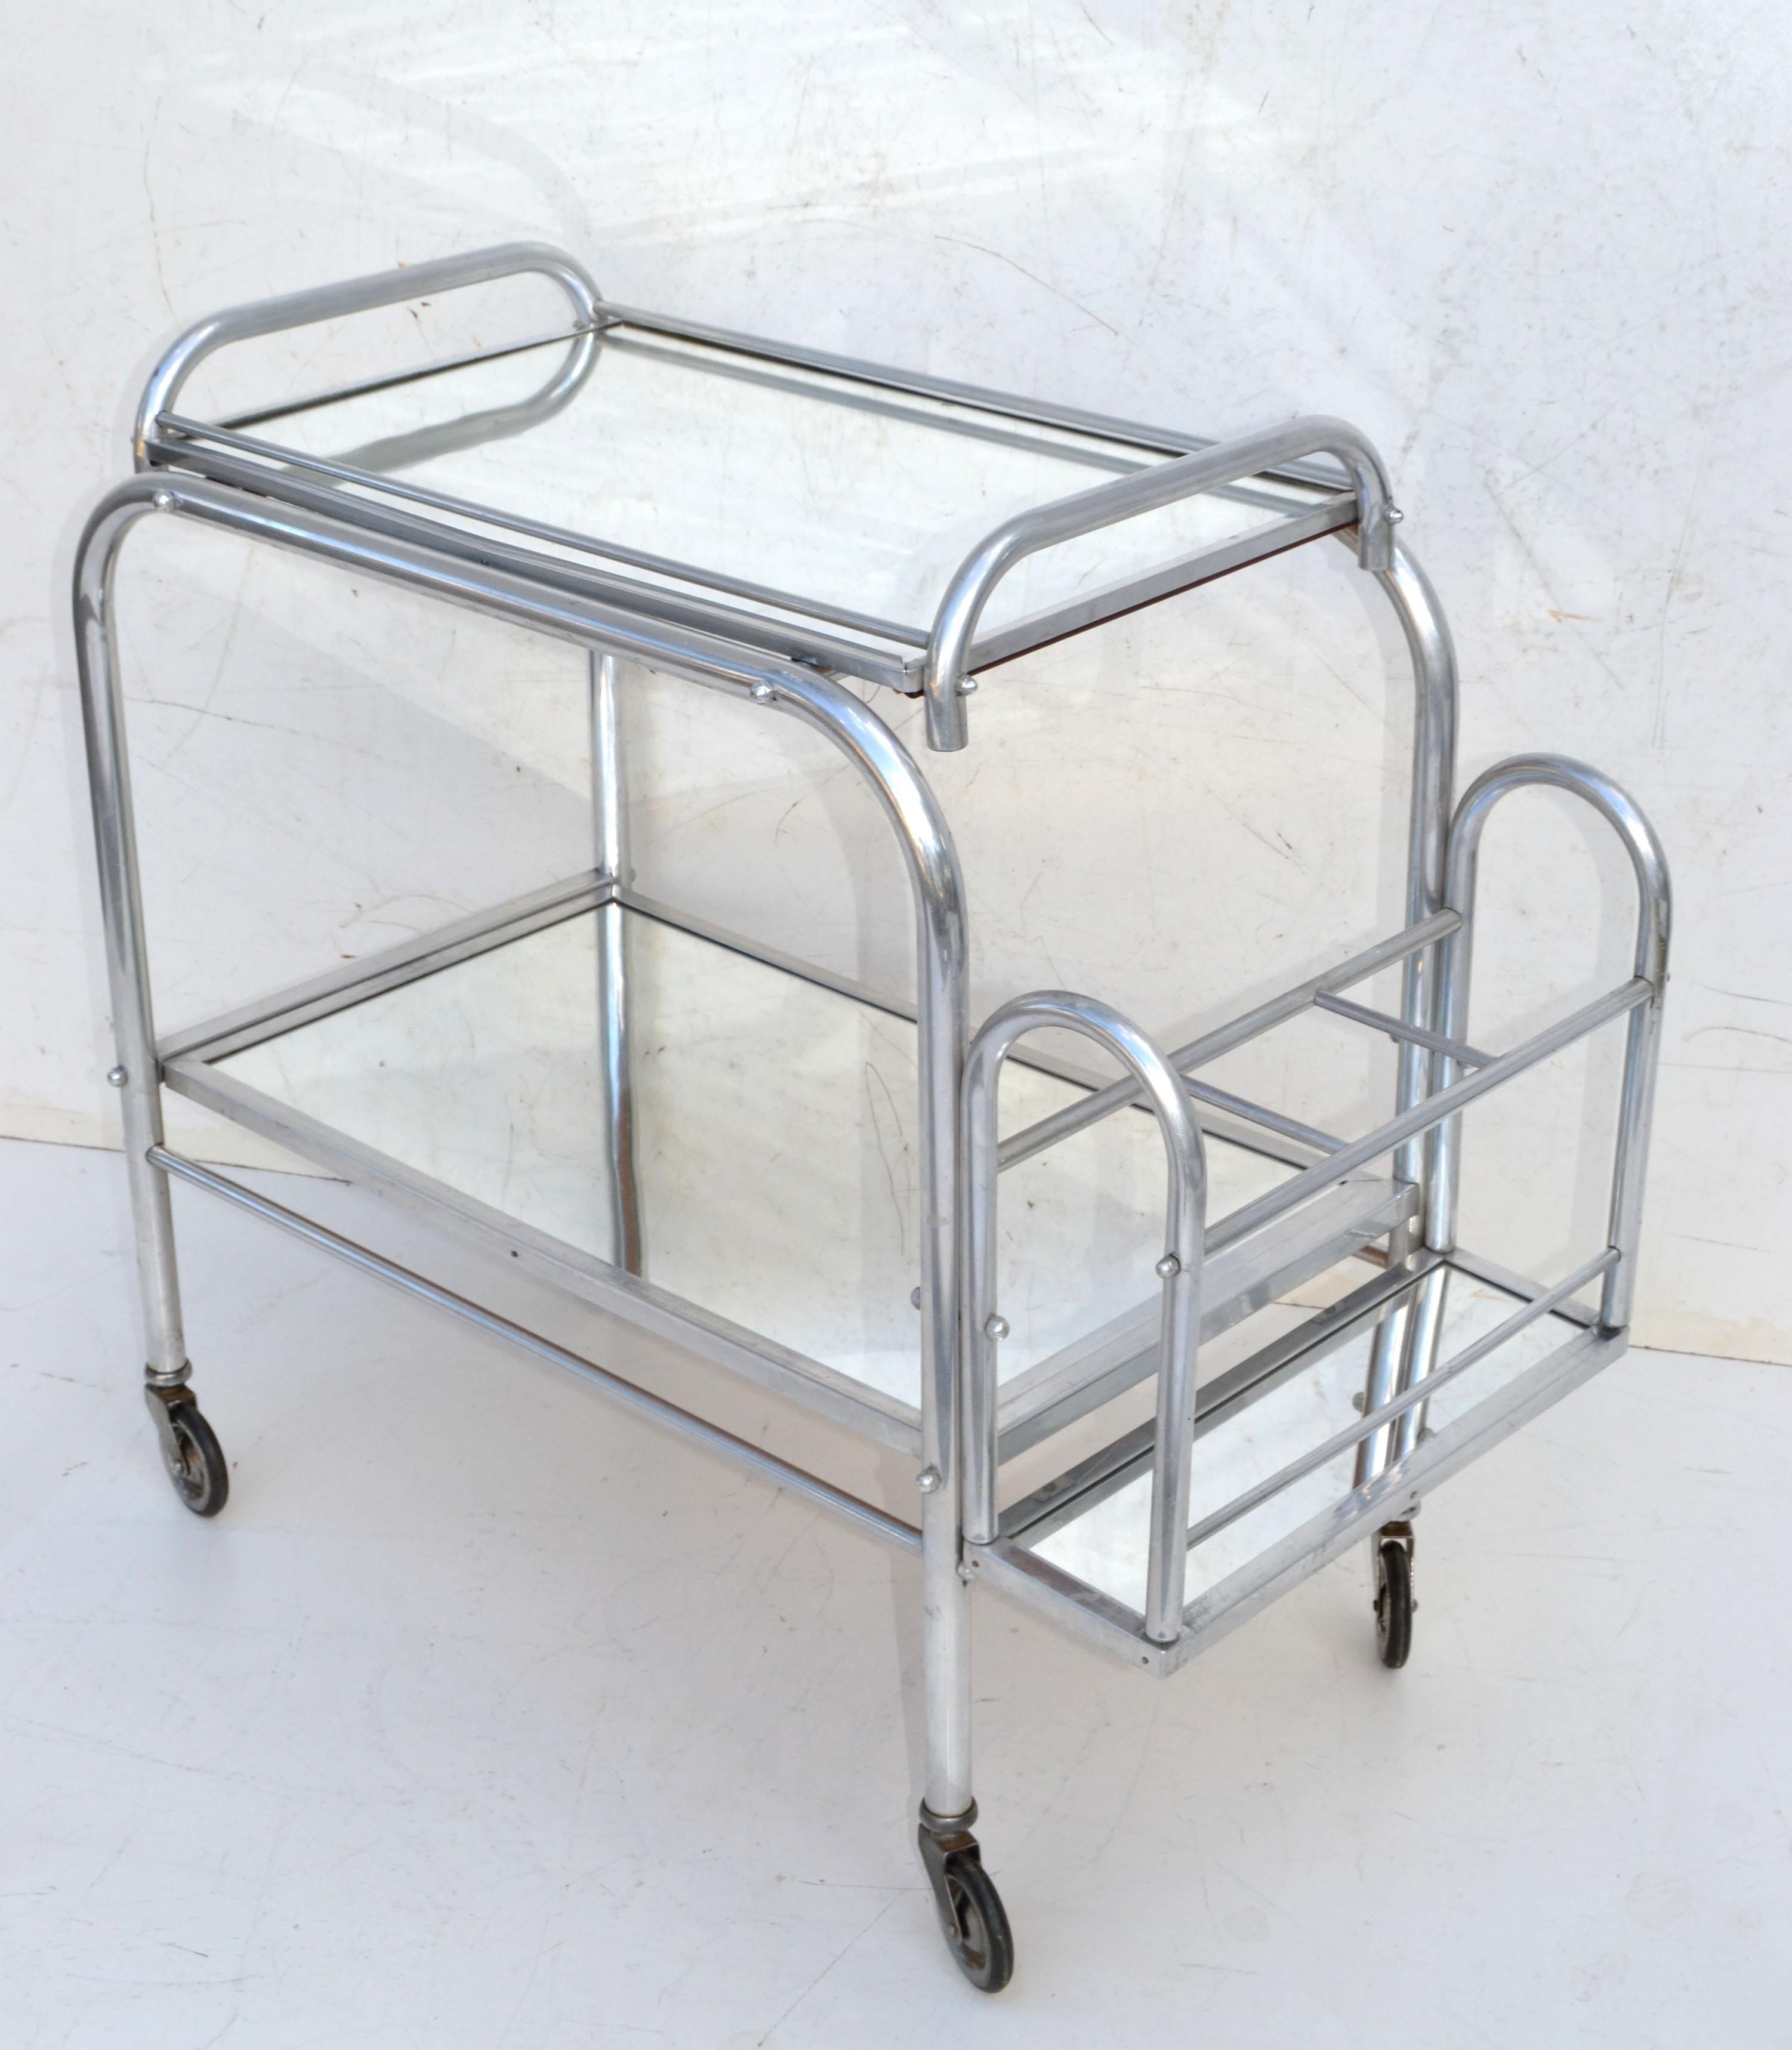 Jacques Adnet 2-tier bar cart, removable top mirror tray and bottle holder.
Very good original condition and wheels run smoothly.
Tray dimensions: 24 / 15 inches.
Space in between is 13 inches height.
Bottle holder measures: 12 x 5 inches.

